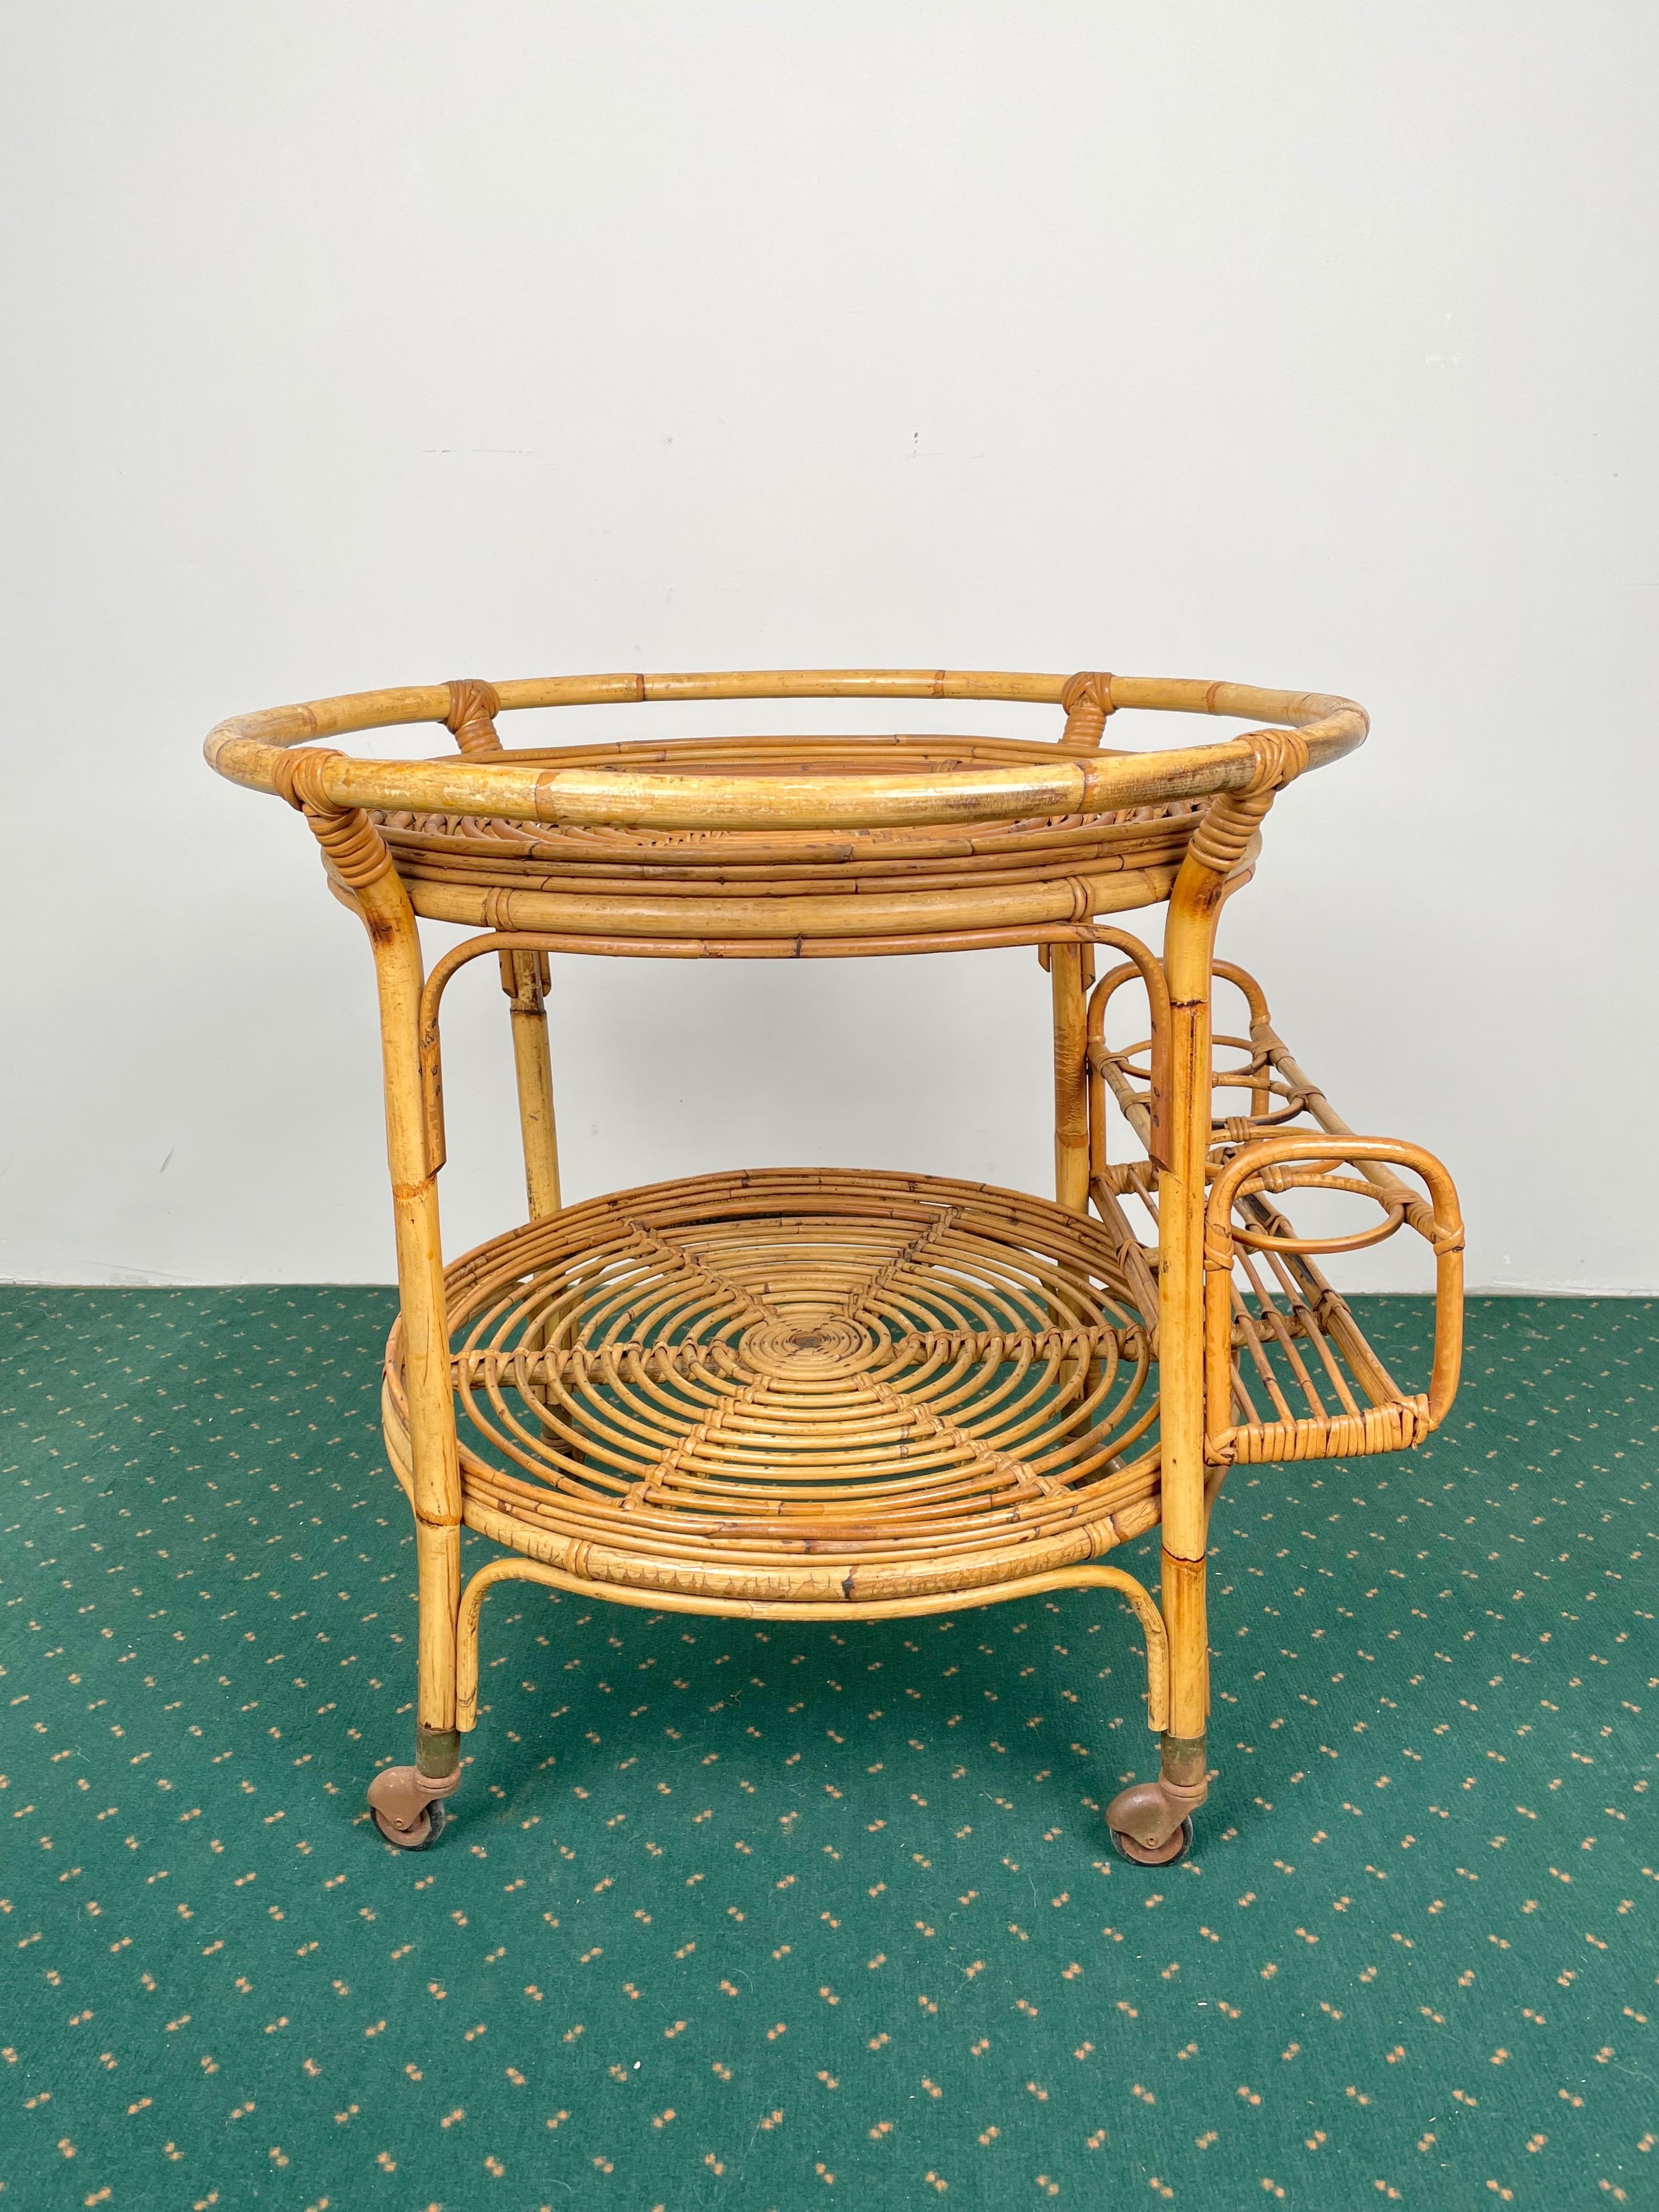 Mid-Century Modern Bamboo & Rattan Round Serving Bar Cart Trolley, Italy, 1960s For Sale